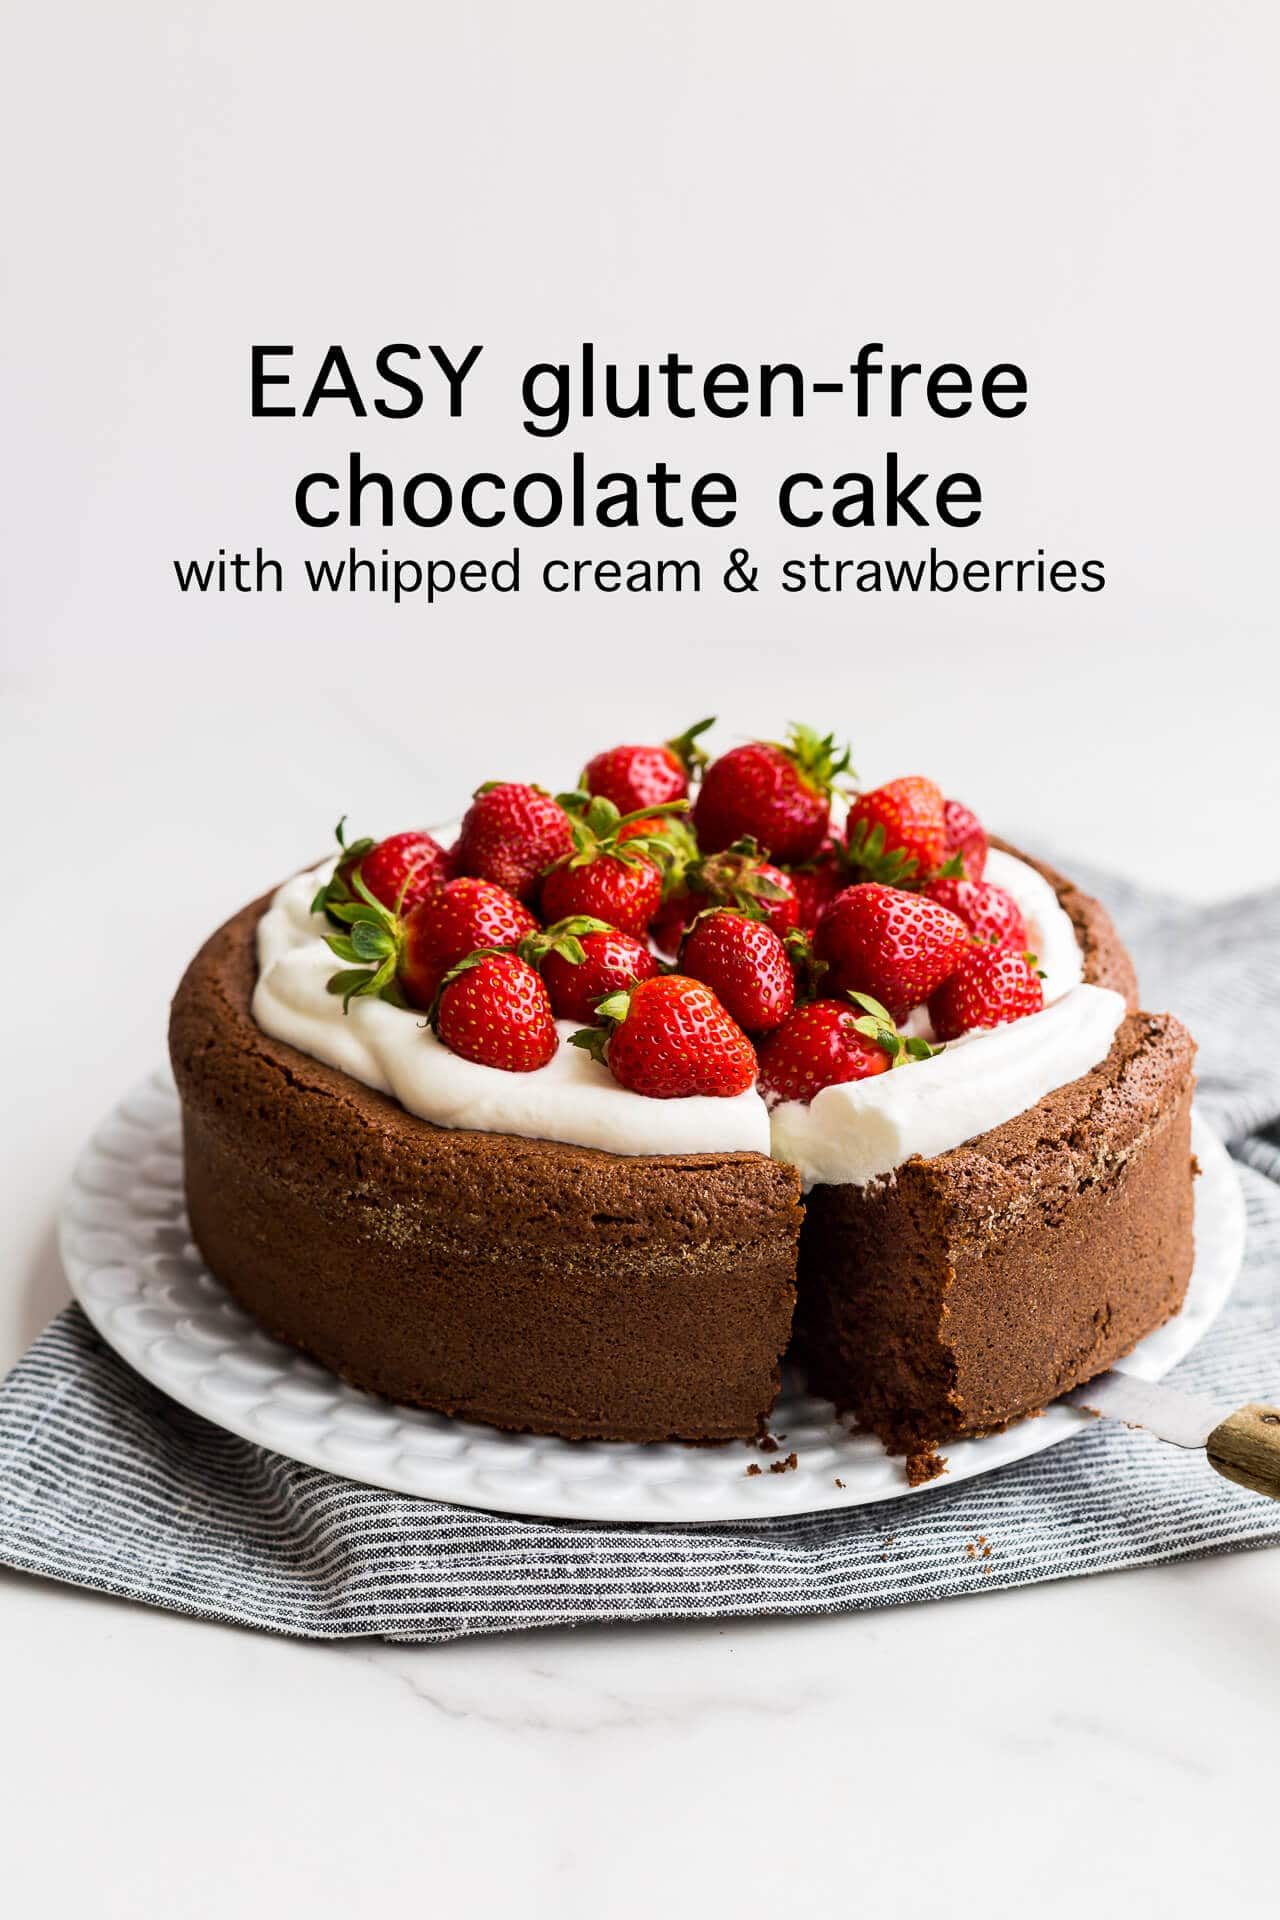 Easy gluten-free chocolate cake with whipped cream and strawberries